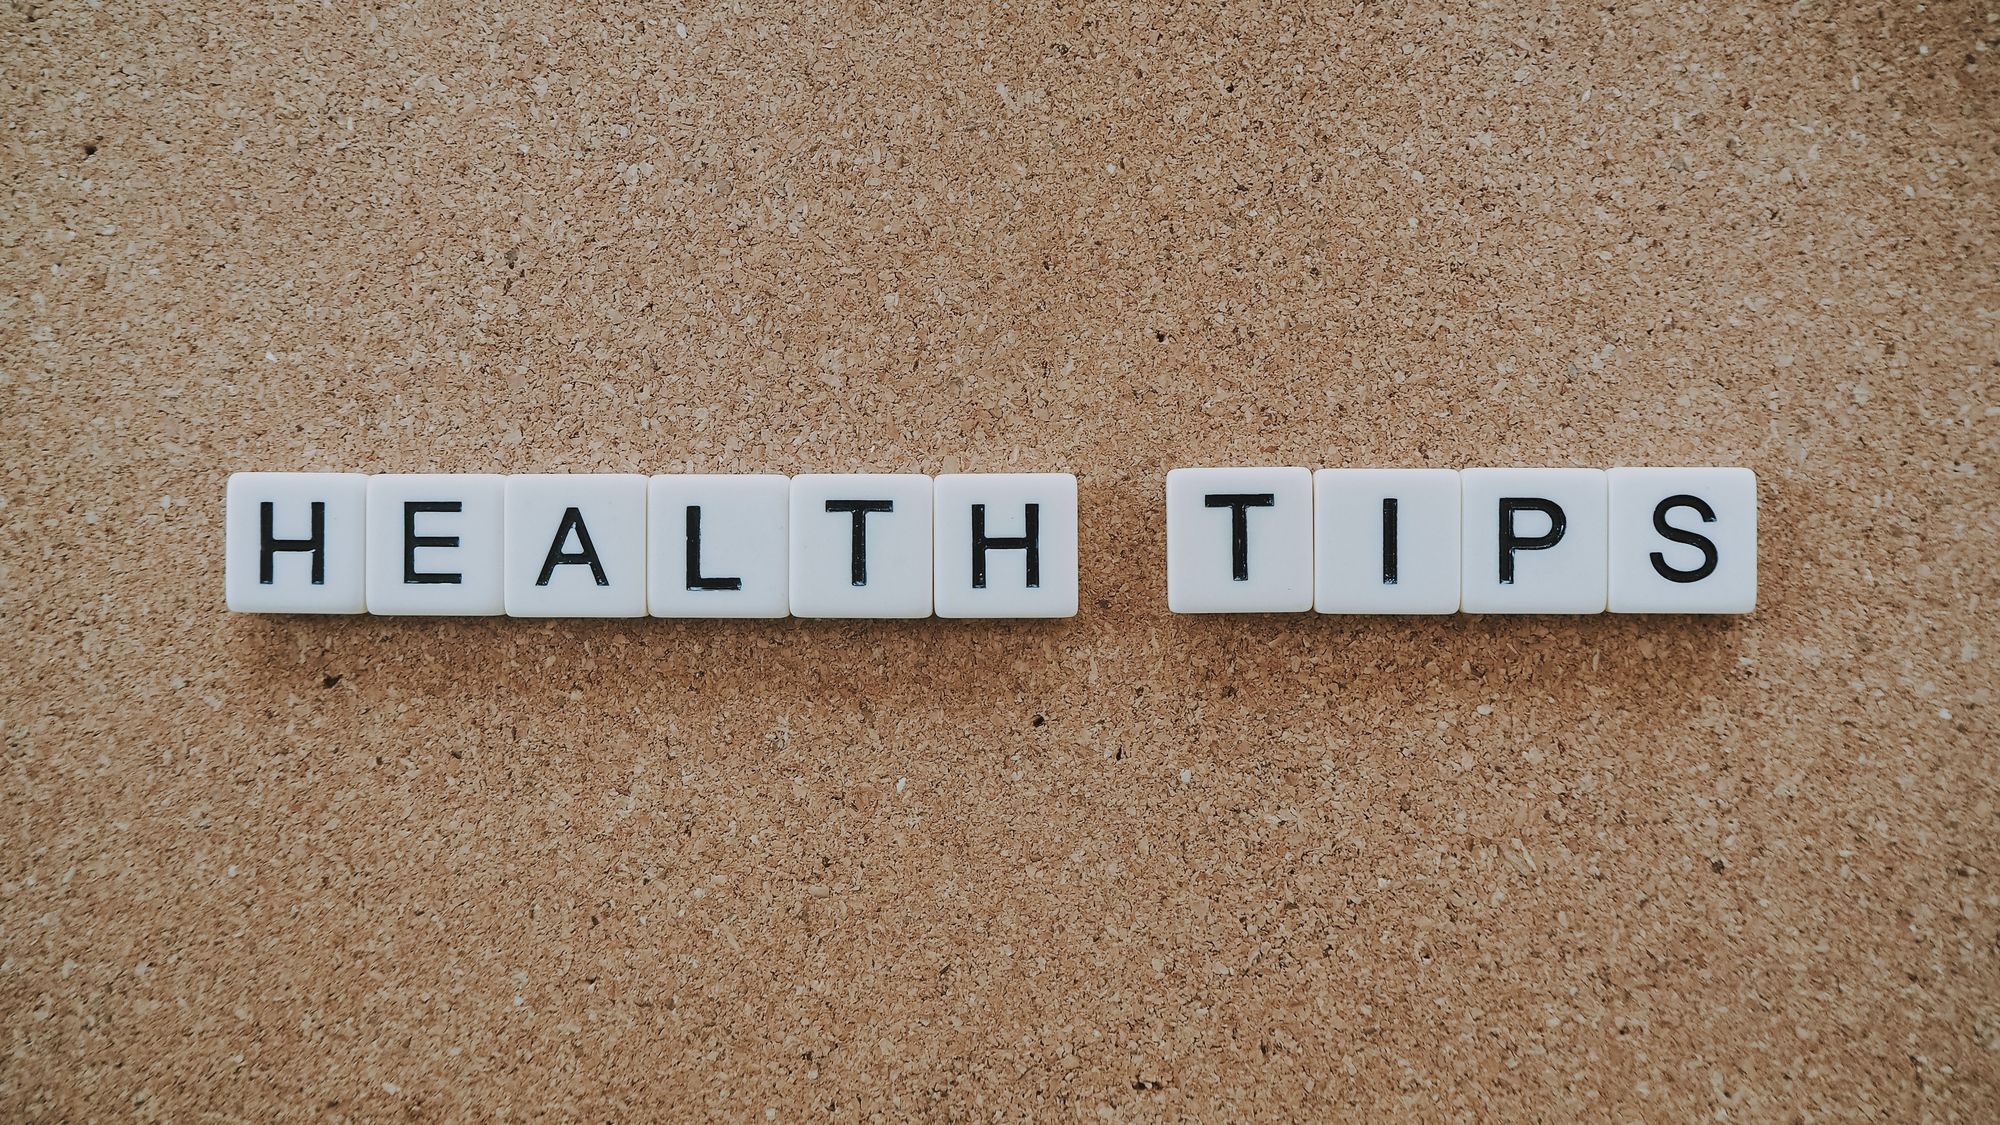 Image showing "Health tips" lettering on tiles